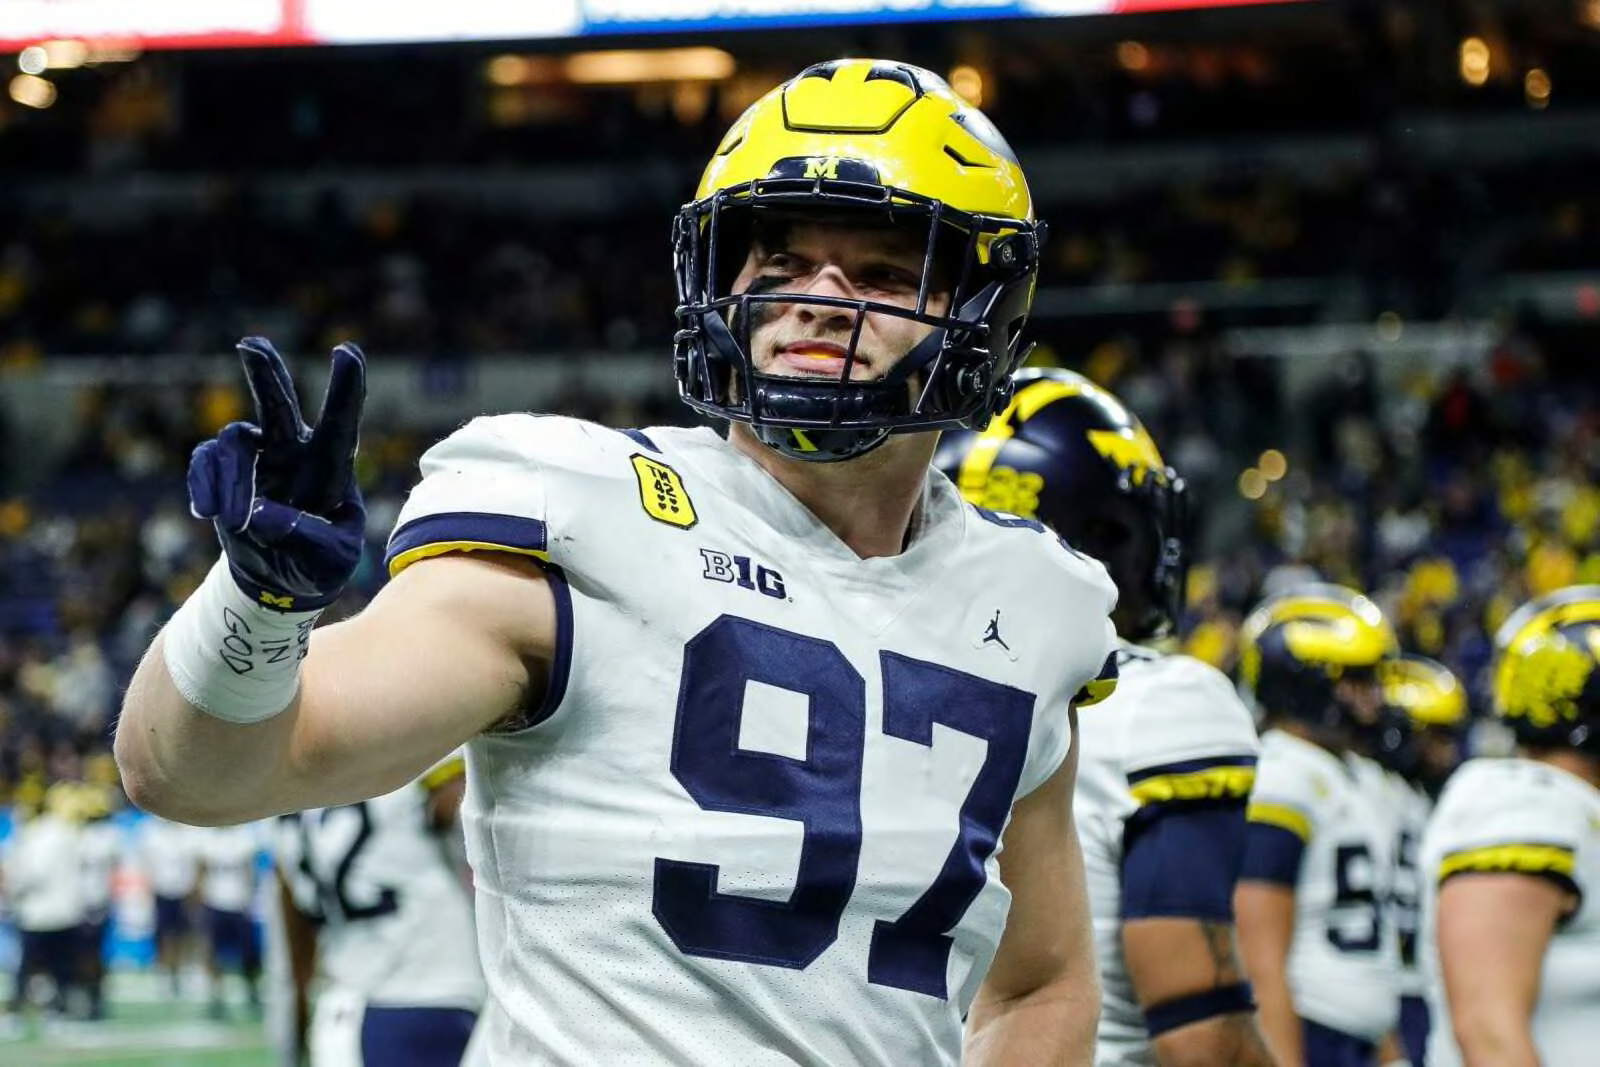 2022 NFL Mock Draft: 3-rounds with surprise blockbuster trades